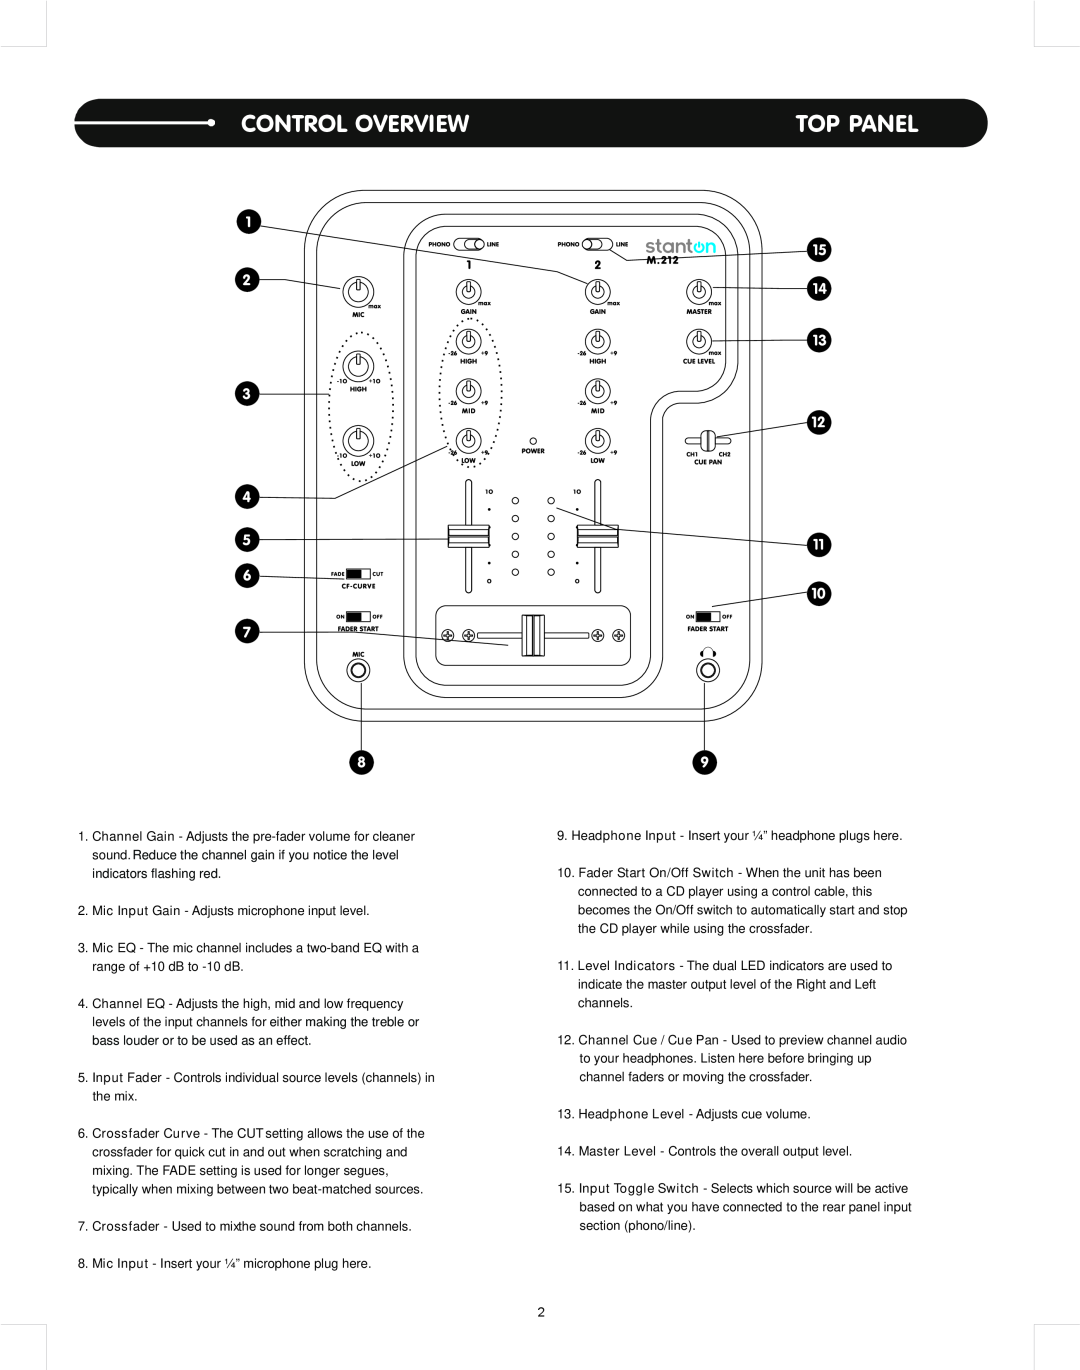 Stanton M.212 user manual Top Panel, Control Overview 